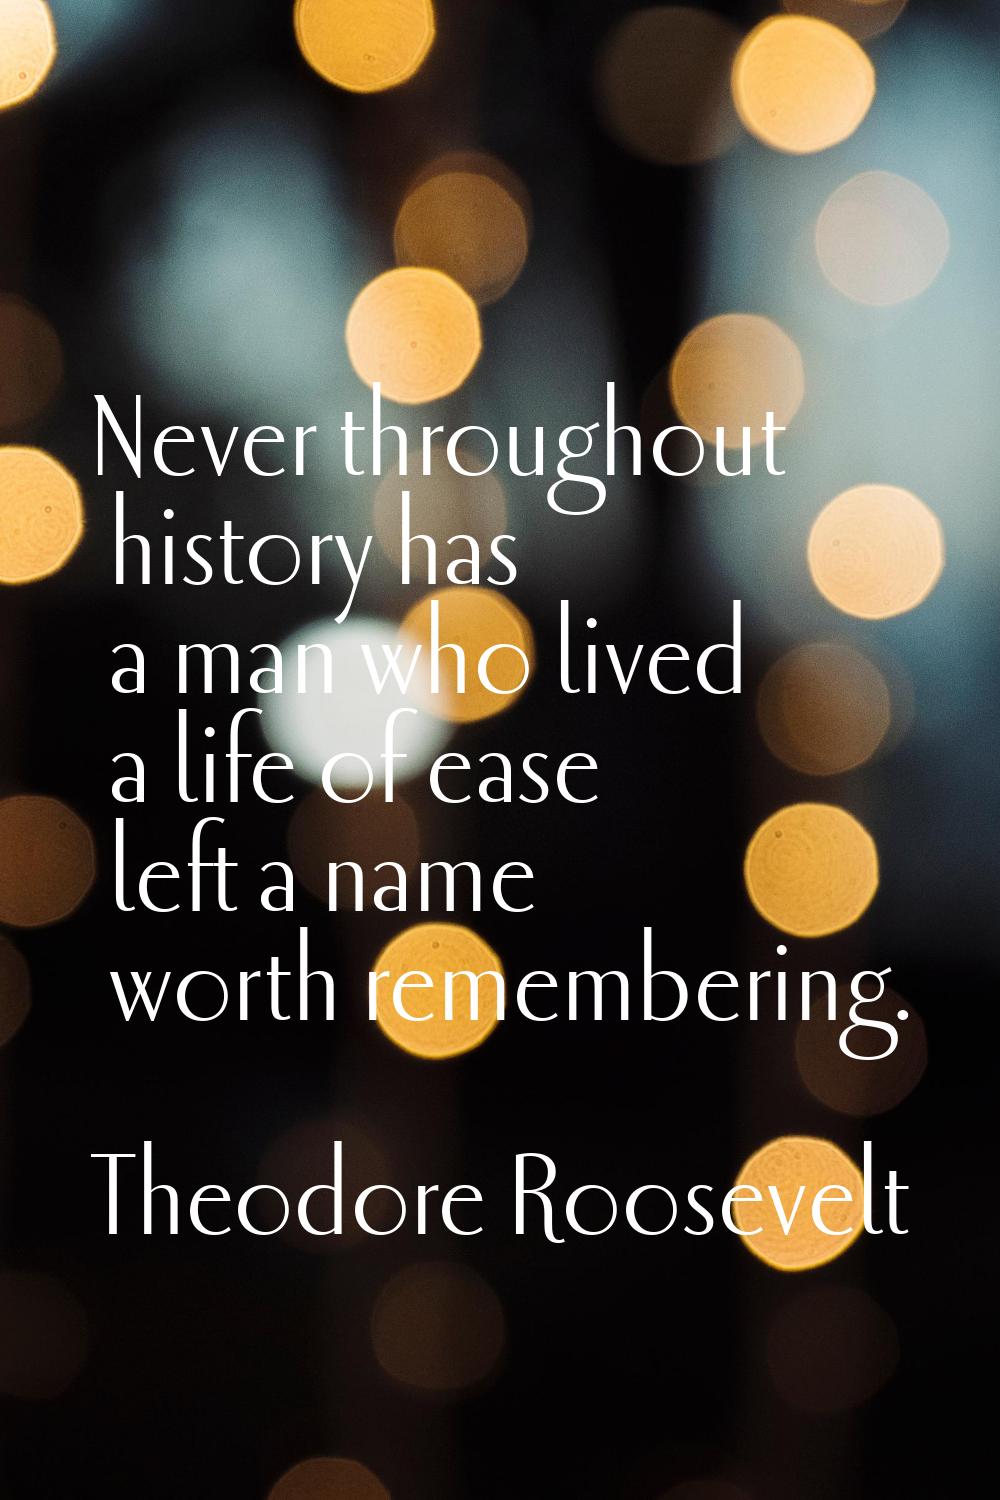 Never throughout history has a man who lived a life of ease left a name worth remembering.